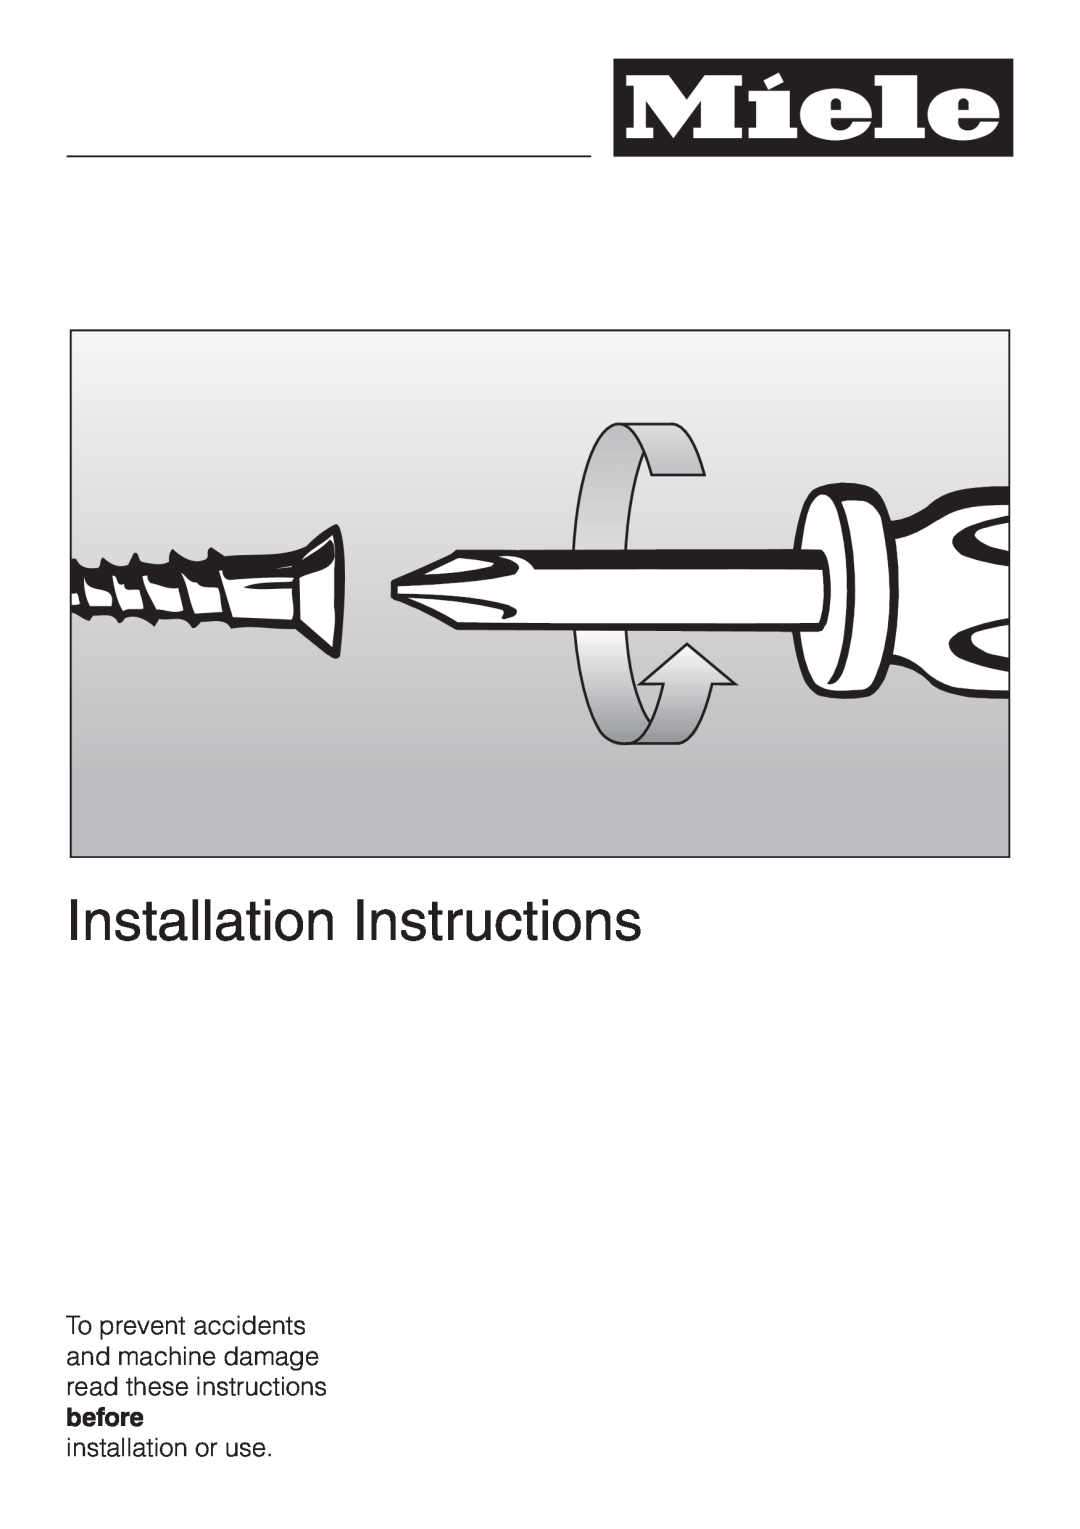 Miele KM 443 operating instructions Installation Instructions, installation or use 